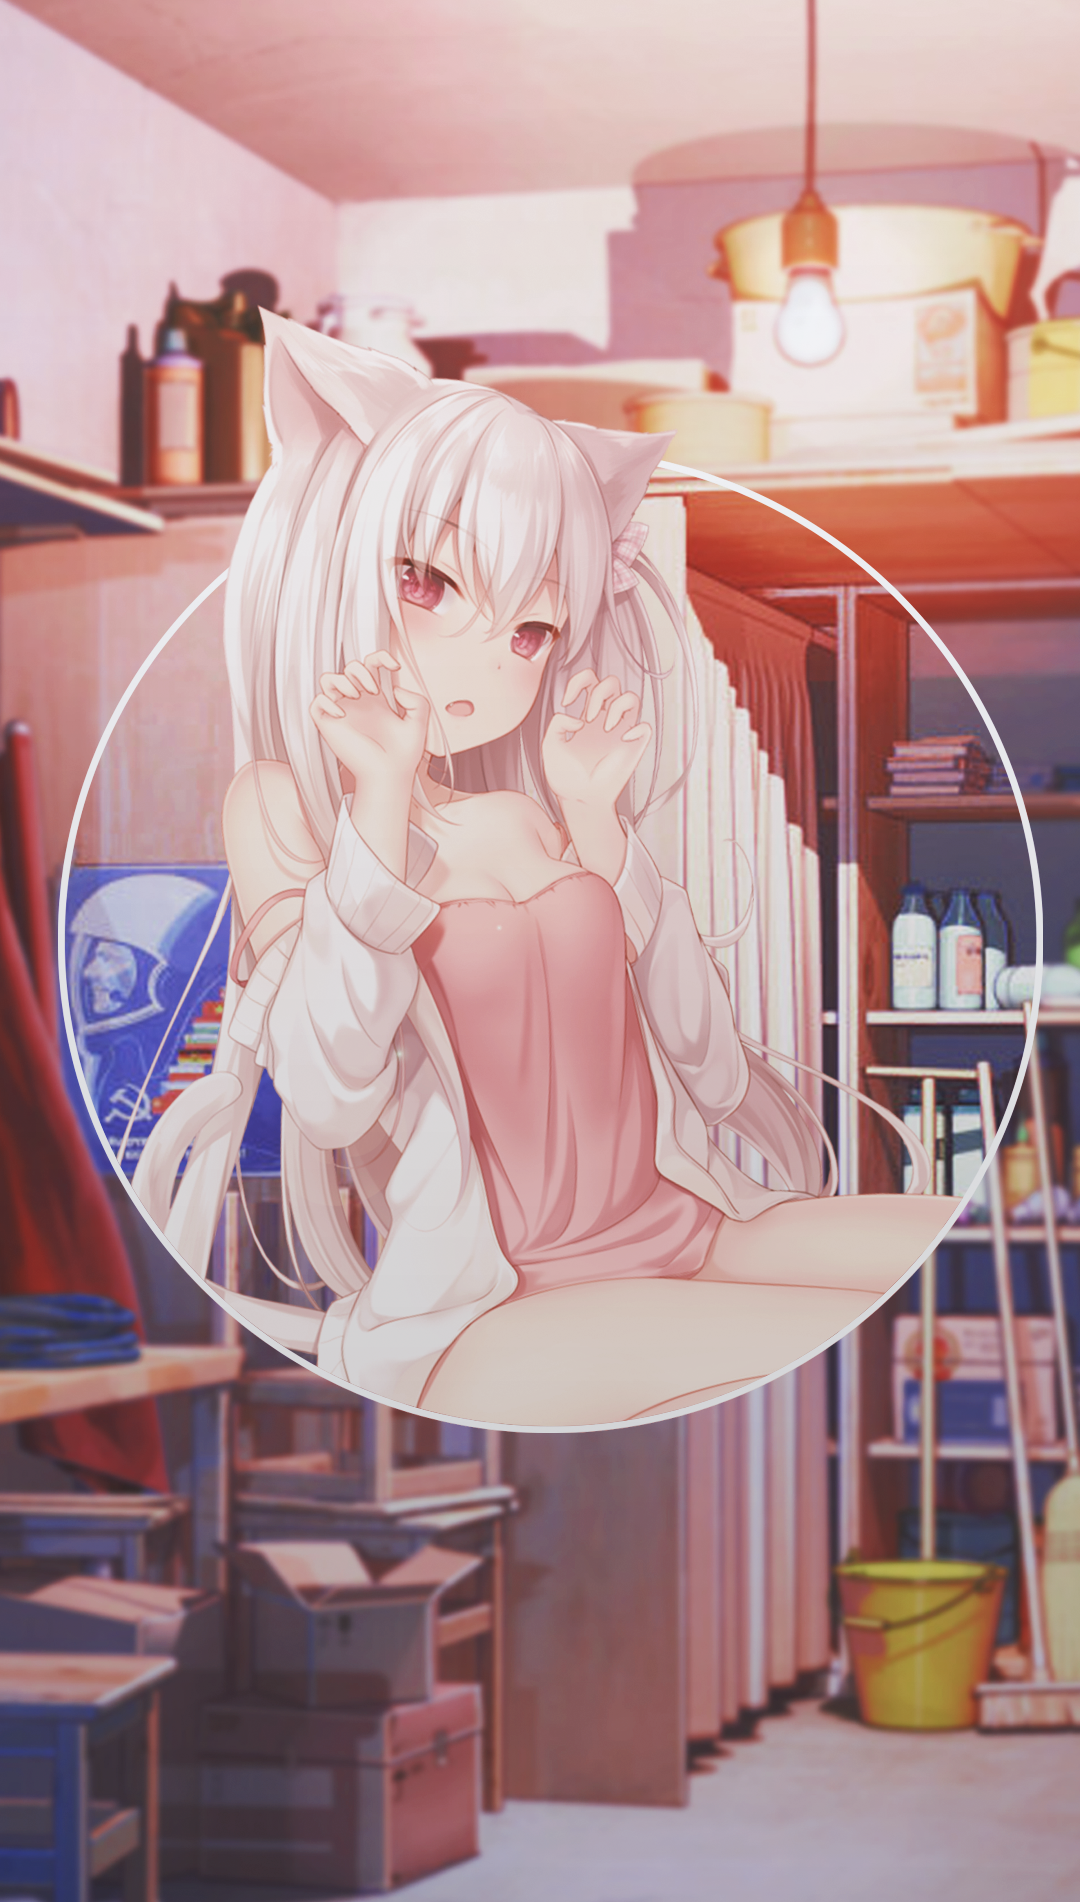 Anime 1080x1902 anime girls anime picture-in-picture cat girl